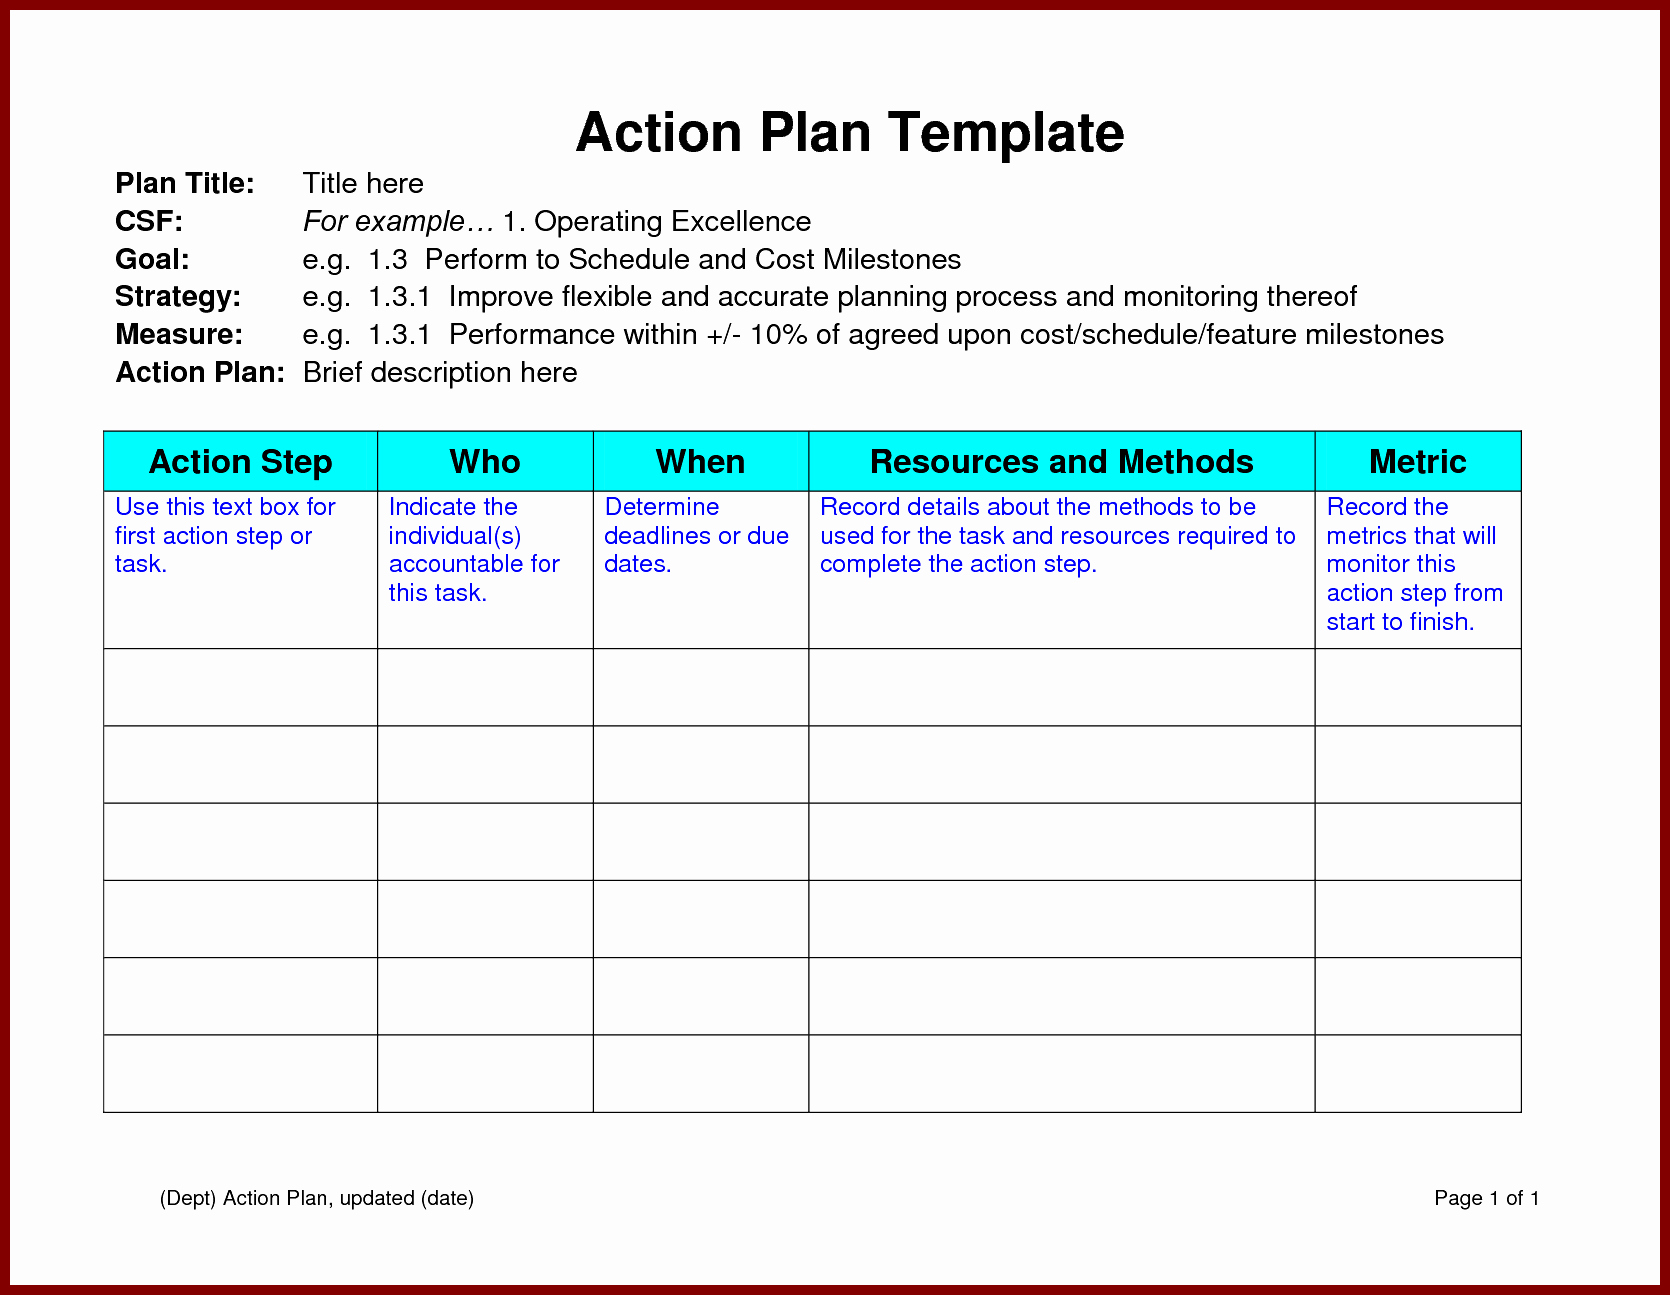 Action Plan Template Word New Action Plan Template Word Example Mughals